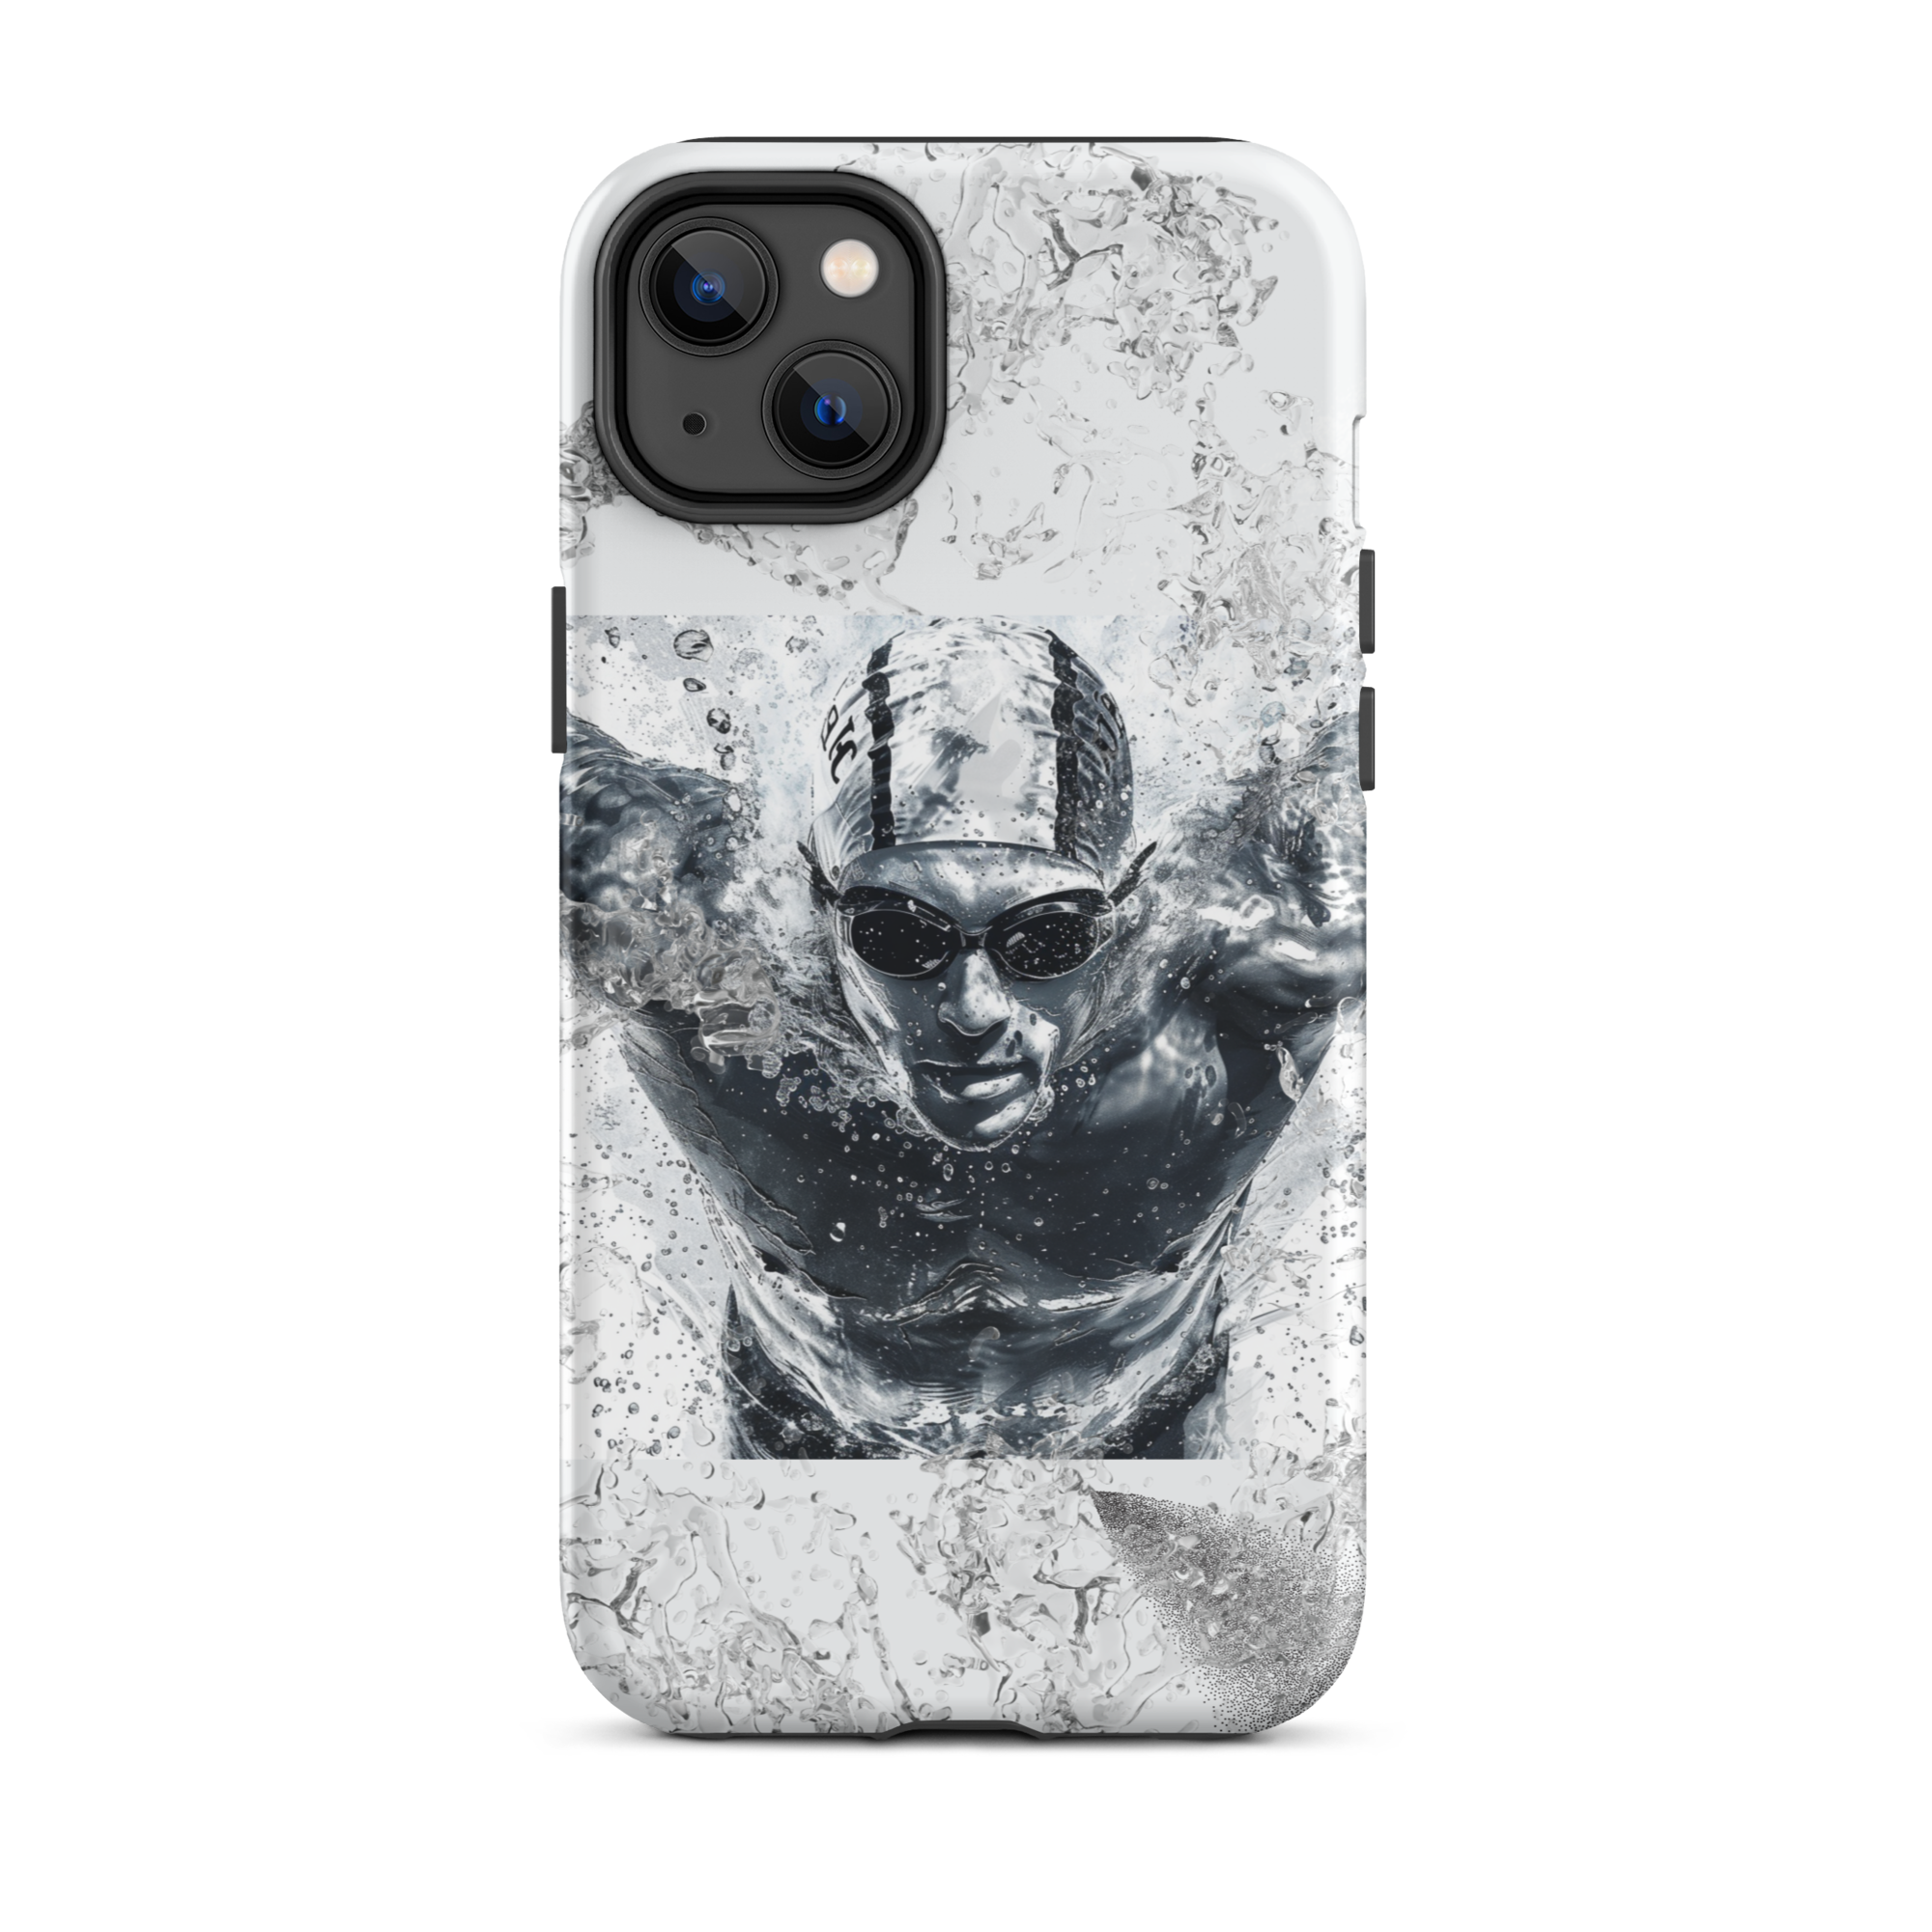 I belong to the water - Tough Iphone Case